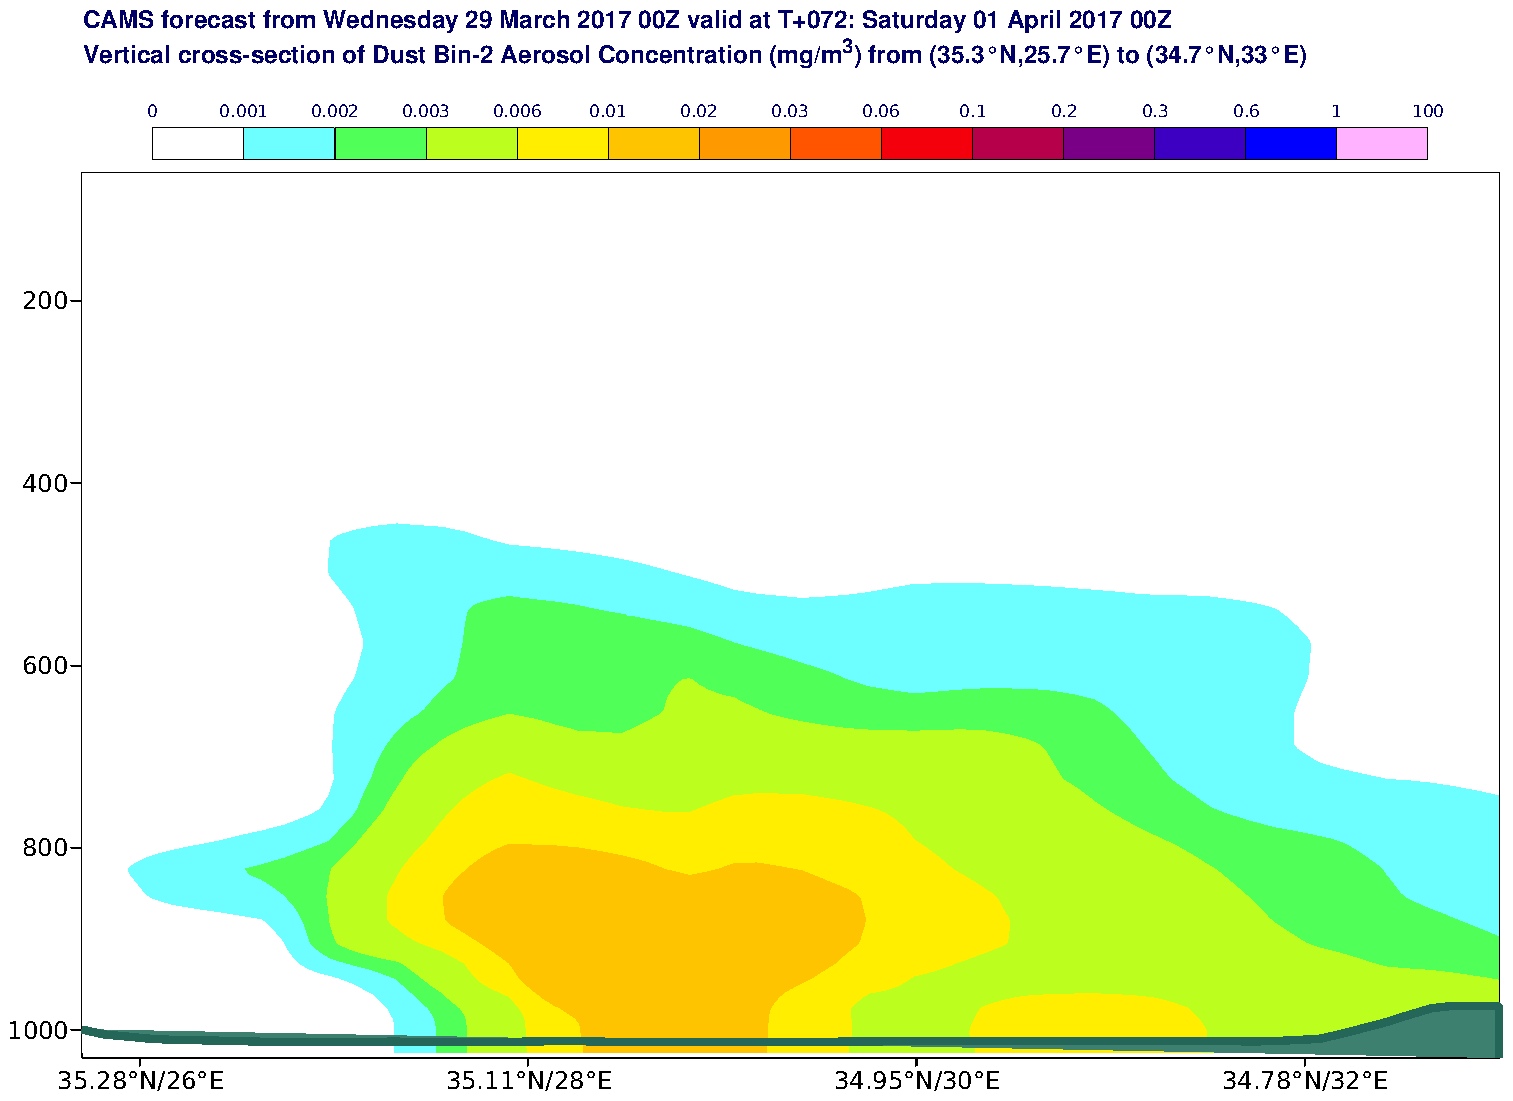 Vertical cross-section of Dust Bin-2 Aerosol Concentration (mg/m3) valid at T72 - 2017-04-01 00:00